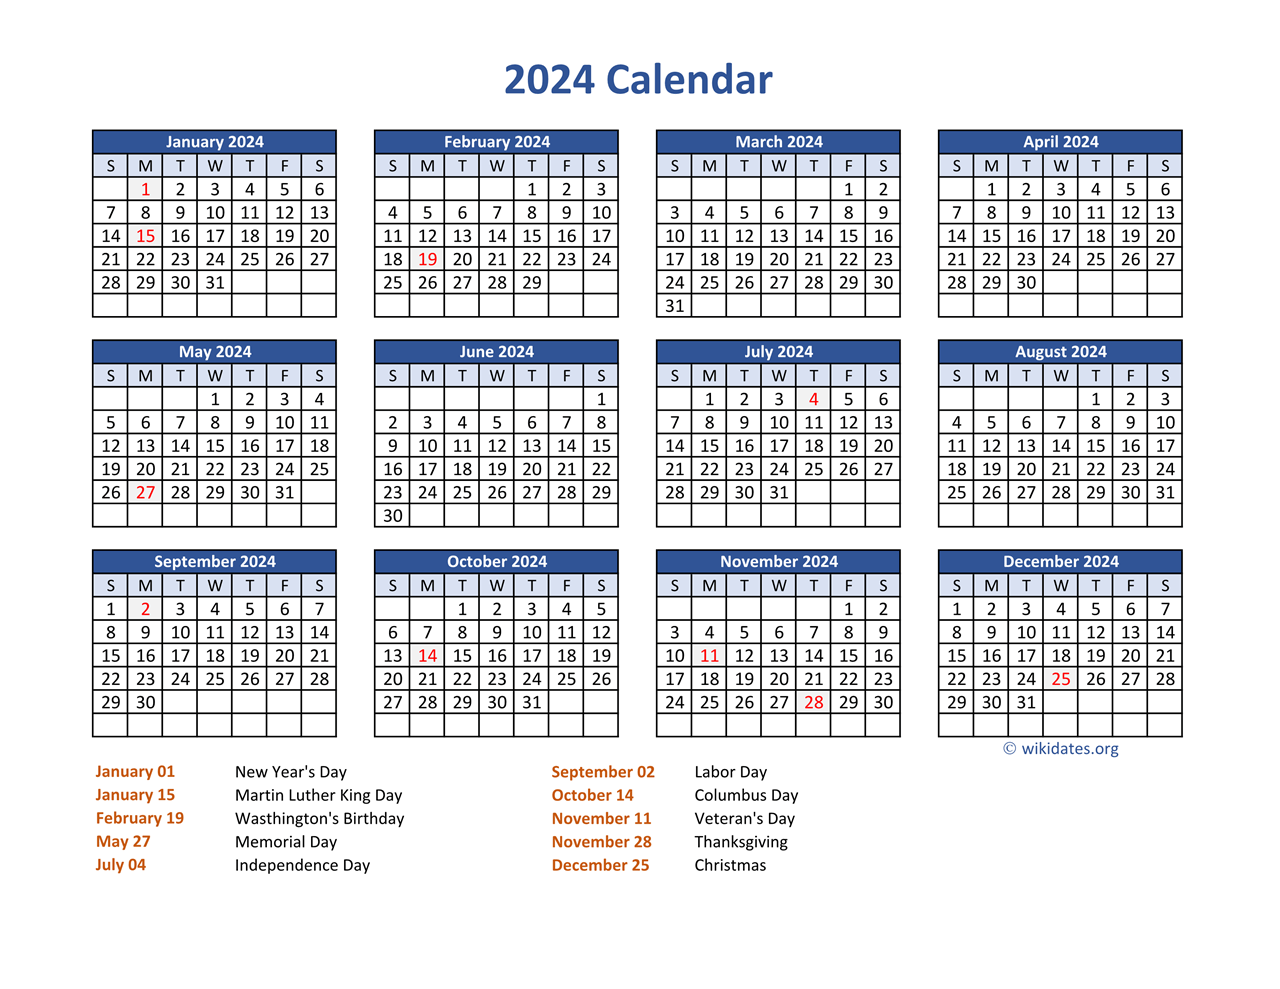 Pdf Calendar 2024 With Federal Holidays | Wikidates for Printable Calendar 2024 With Holidays